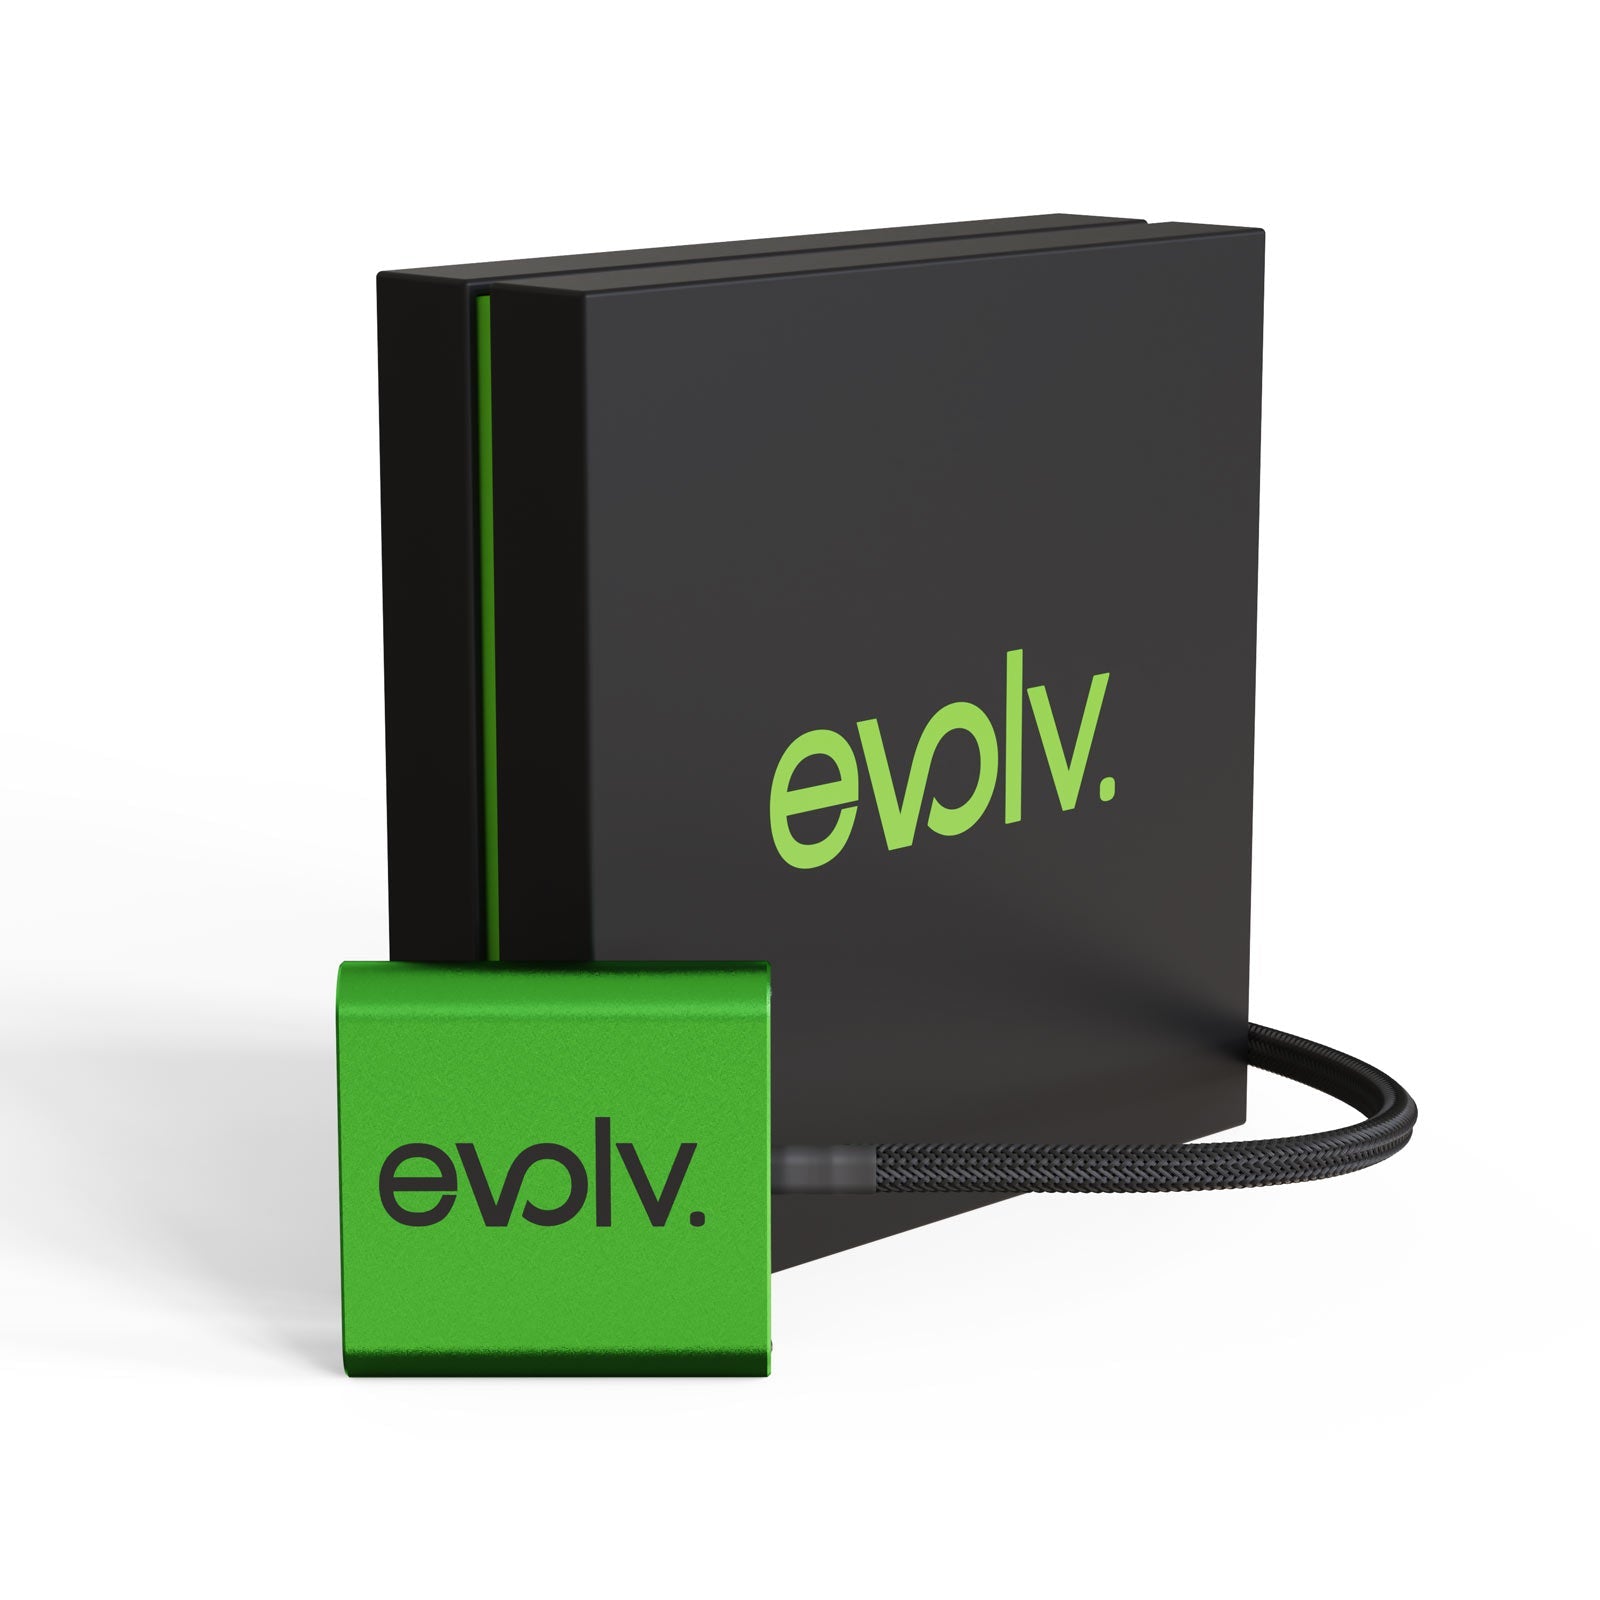 Increase your fuel mileage, performance and throttle response with an Evolv Plymouth Acclaim Performance Chip!